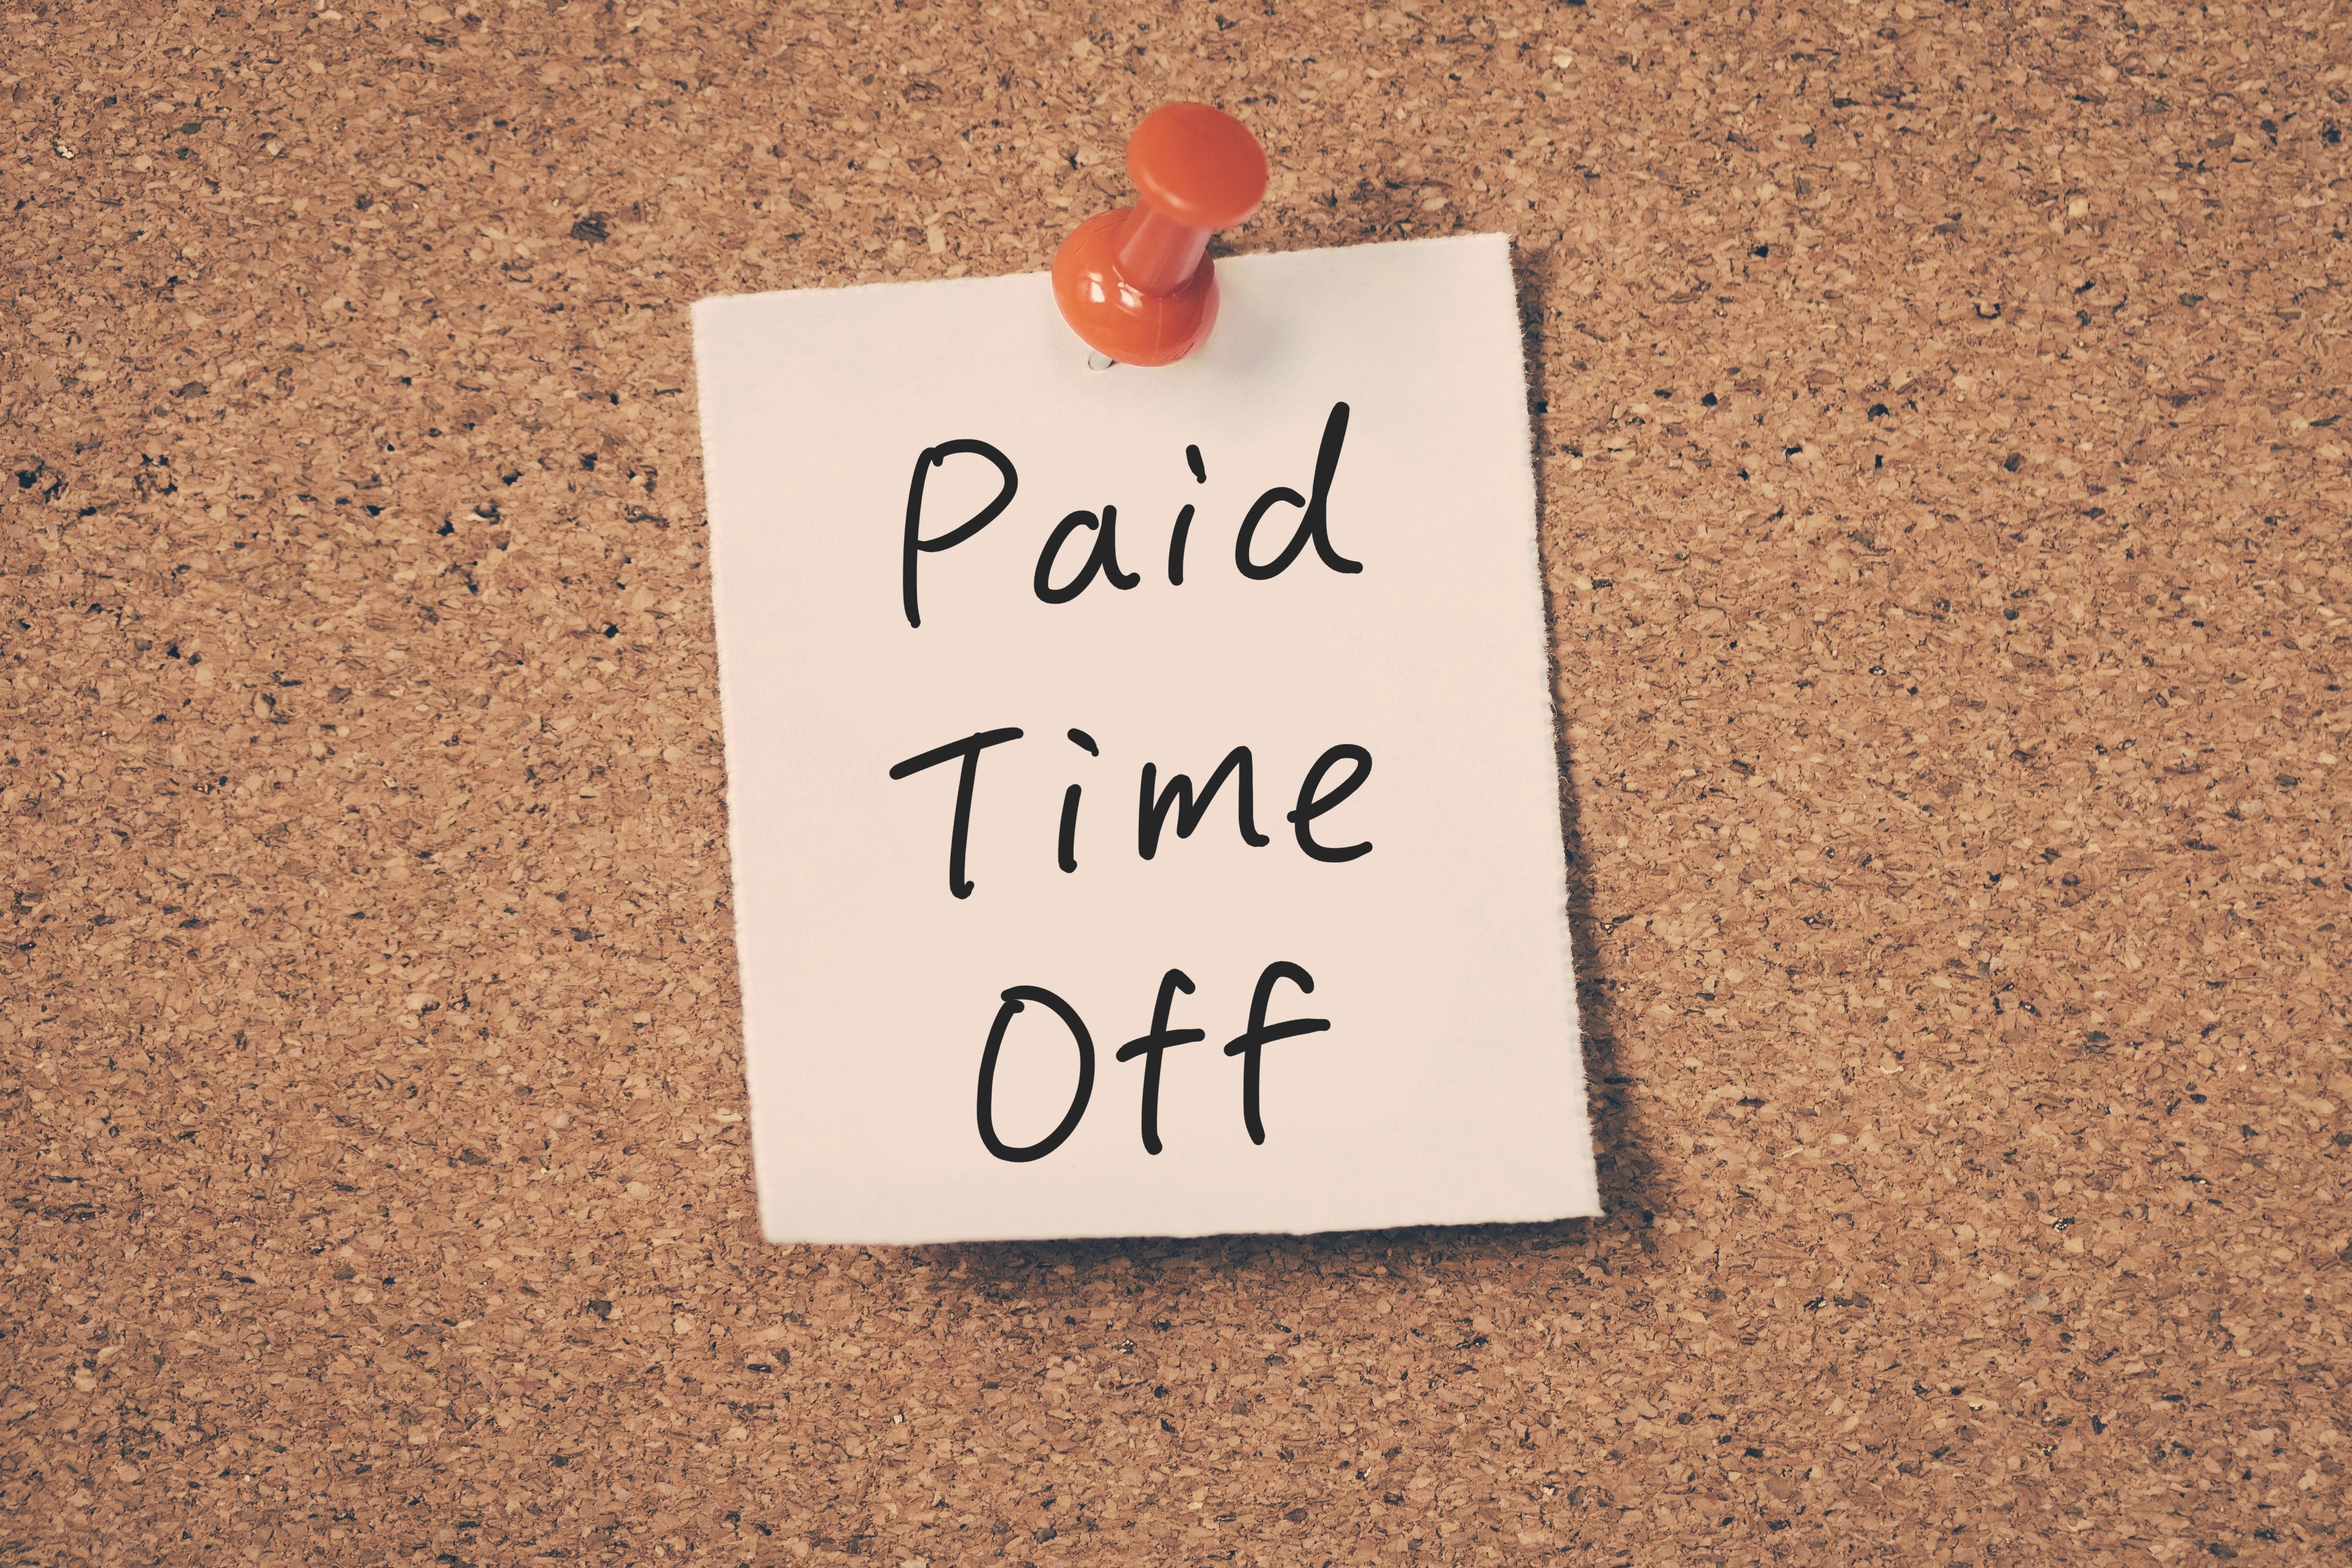 Tracking Paid Time Off